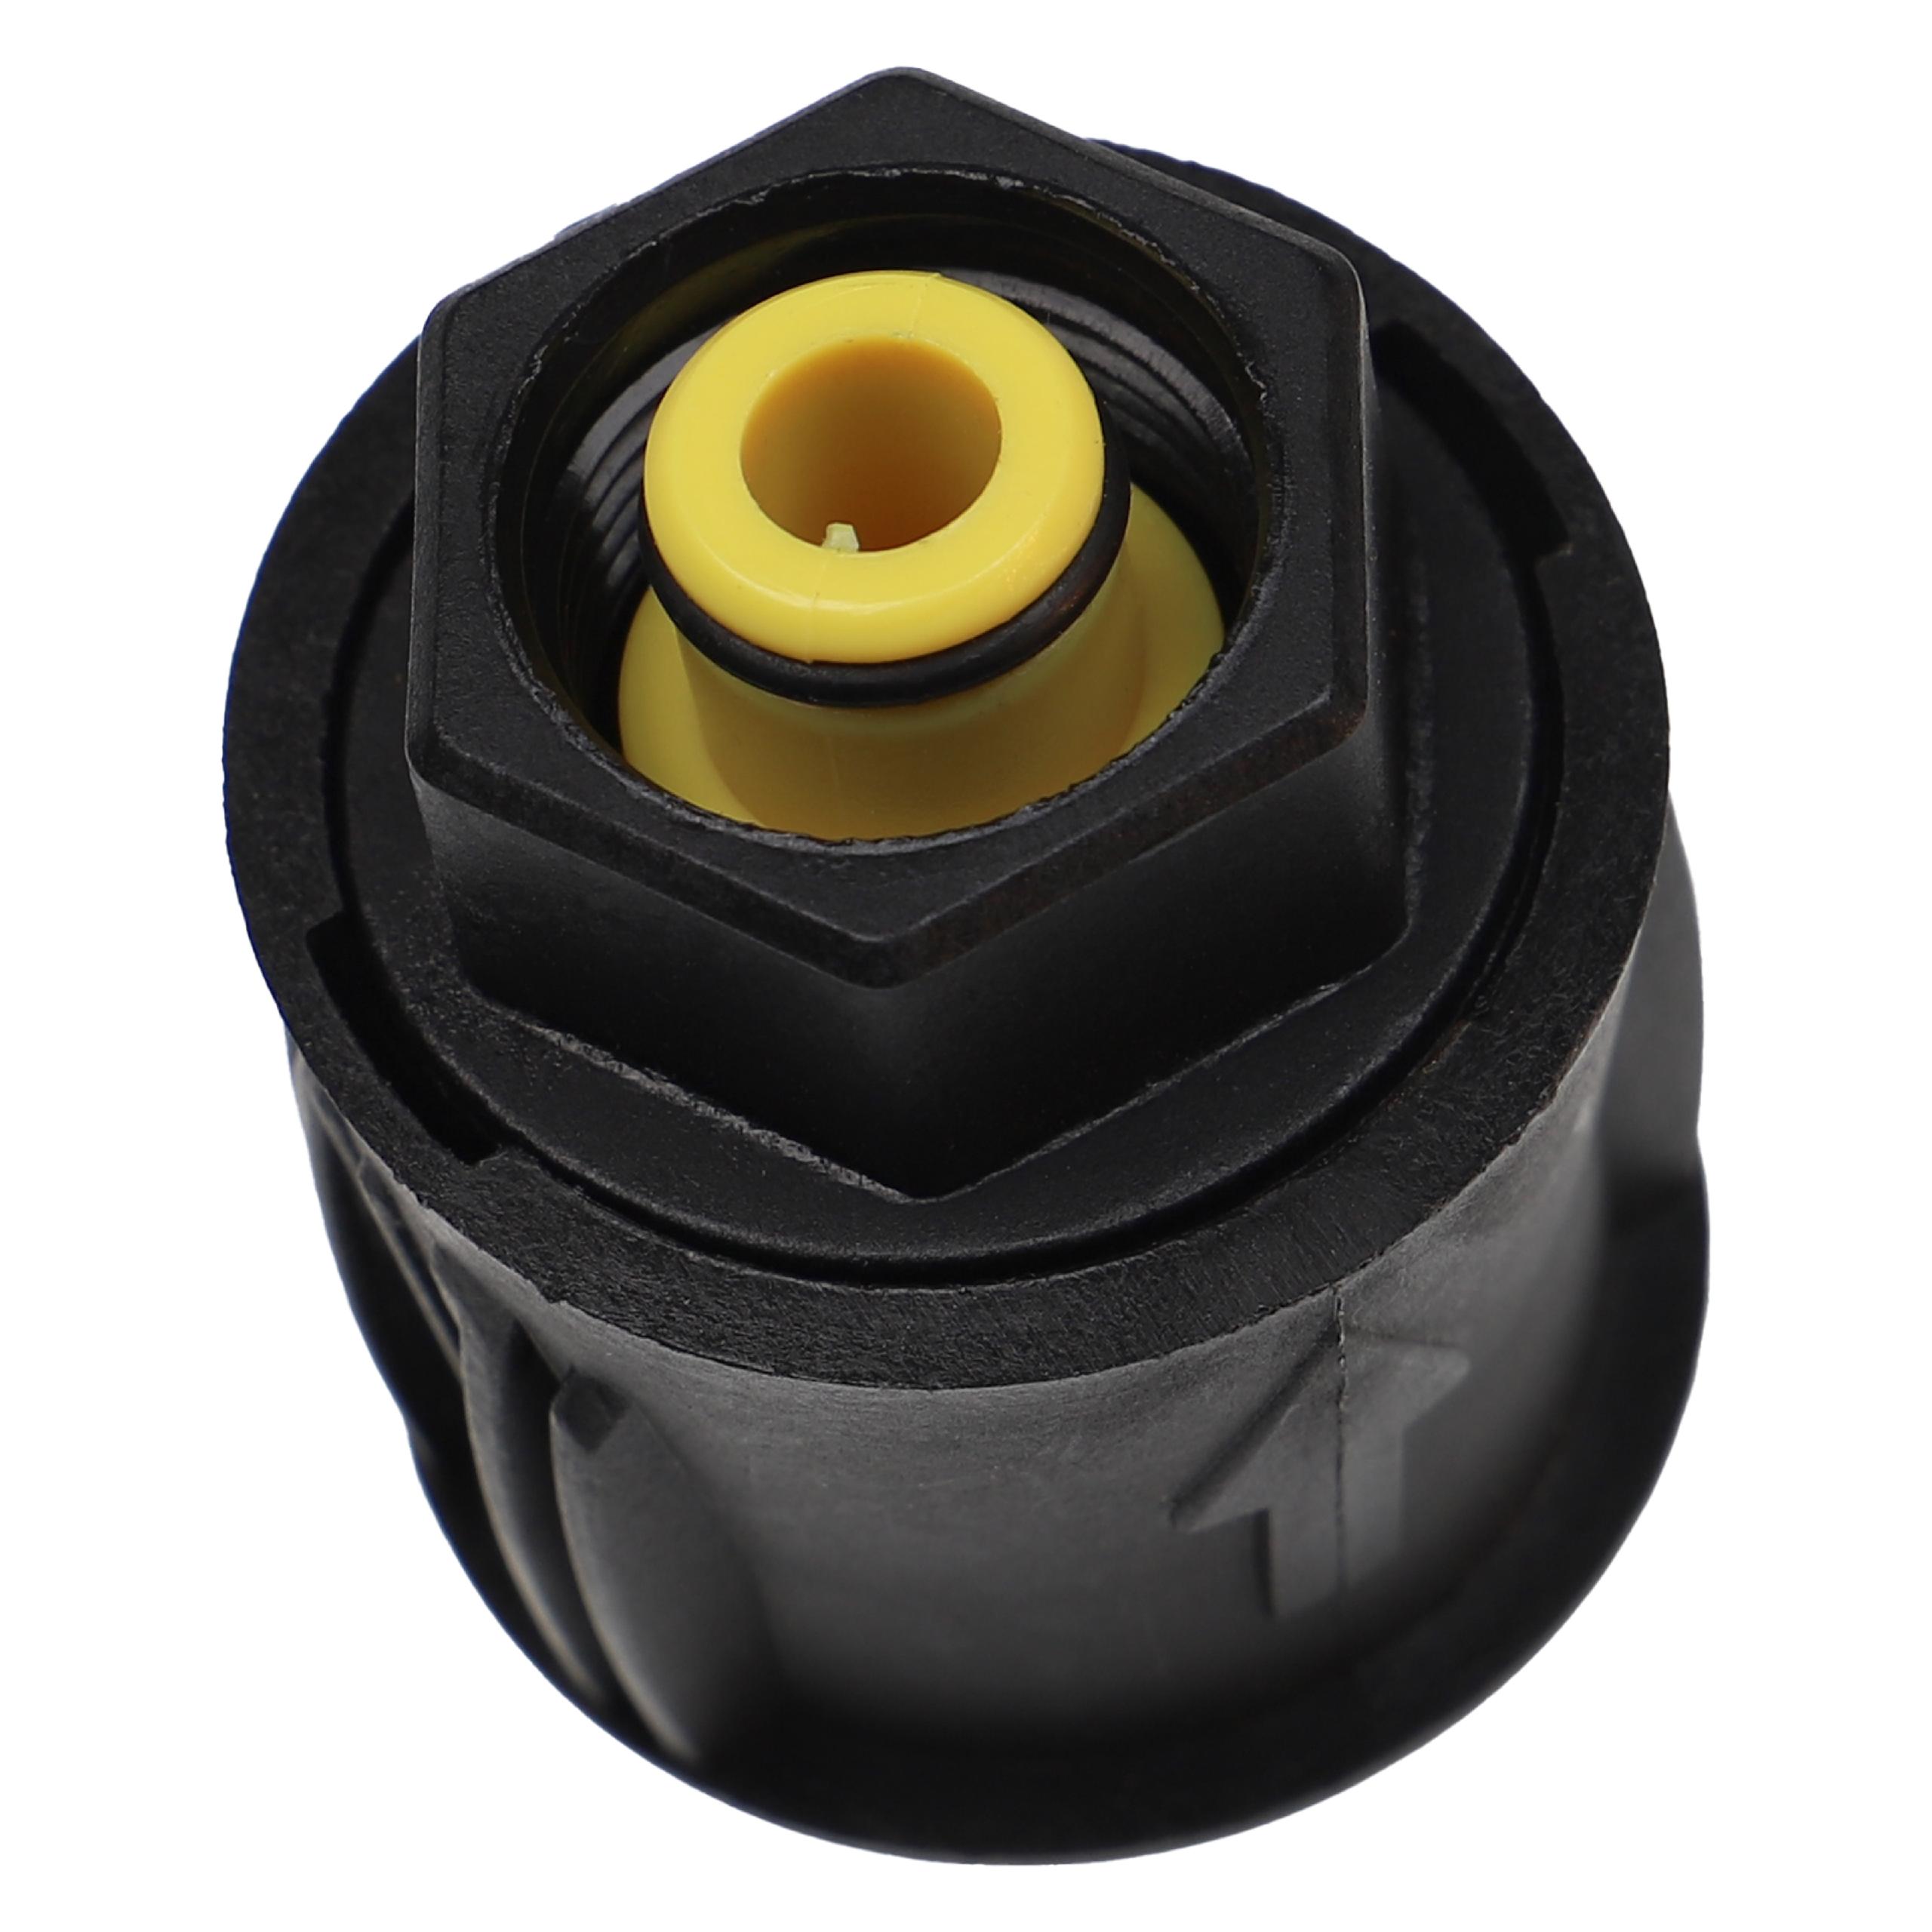 vhbw Adapter Quick Connector to M22 Thread High-Pressure Cleaner - Quick Coupling